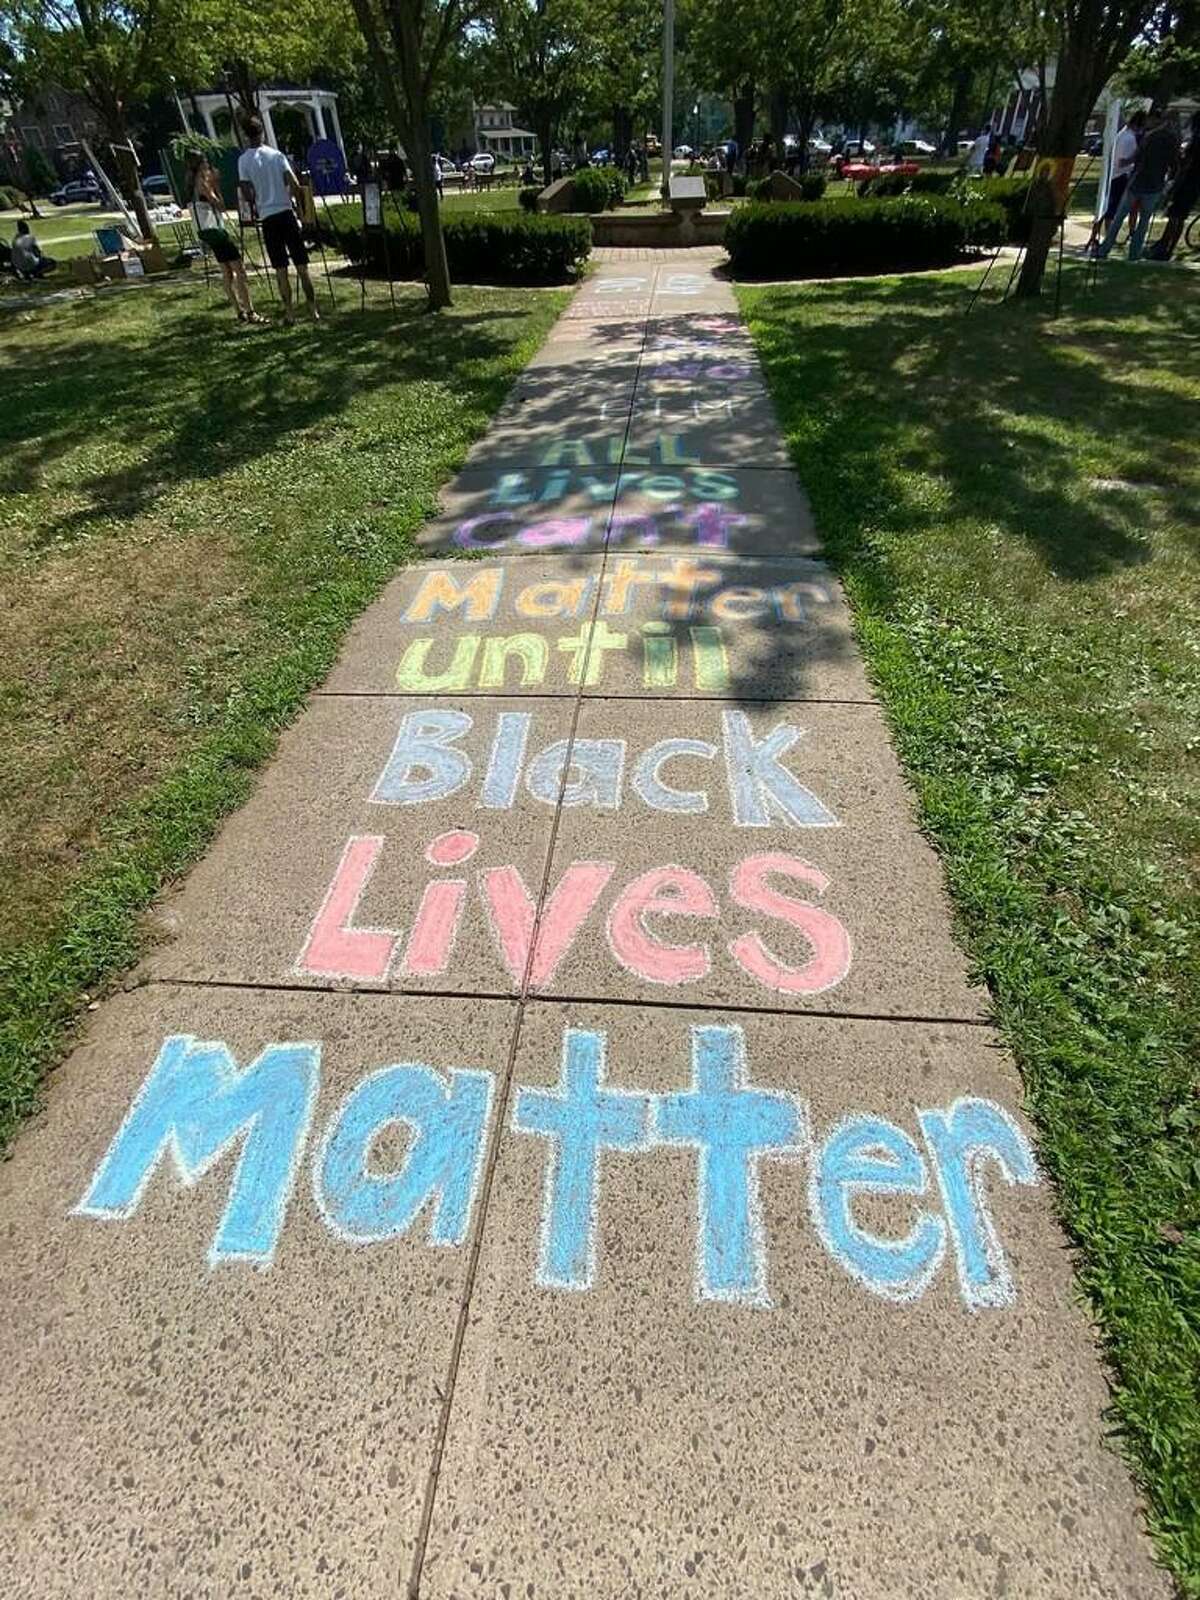 Sidewalk chalk messages were part of a peaceful, expressive protest last weekend, organized by Brandon Patterson, a community and youth organizer who is leading the charge to have a semi-permanent “Black Lives Matter” mural put in West Haven.